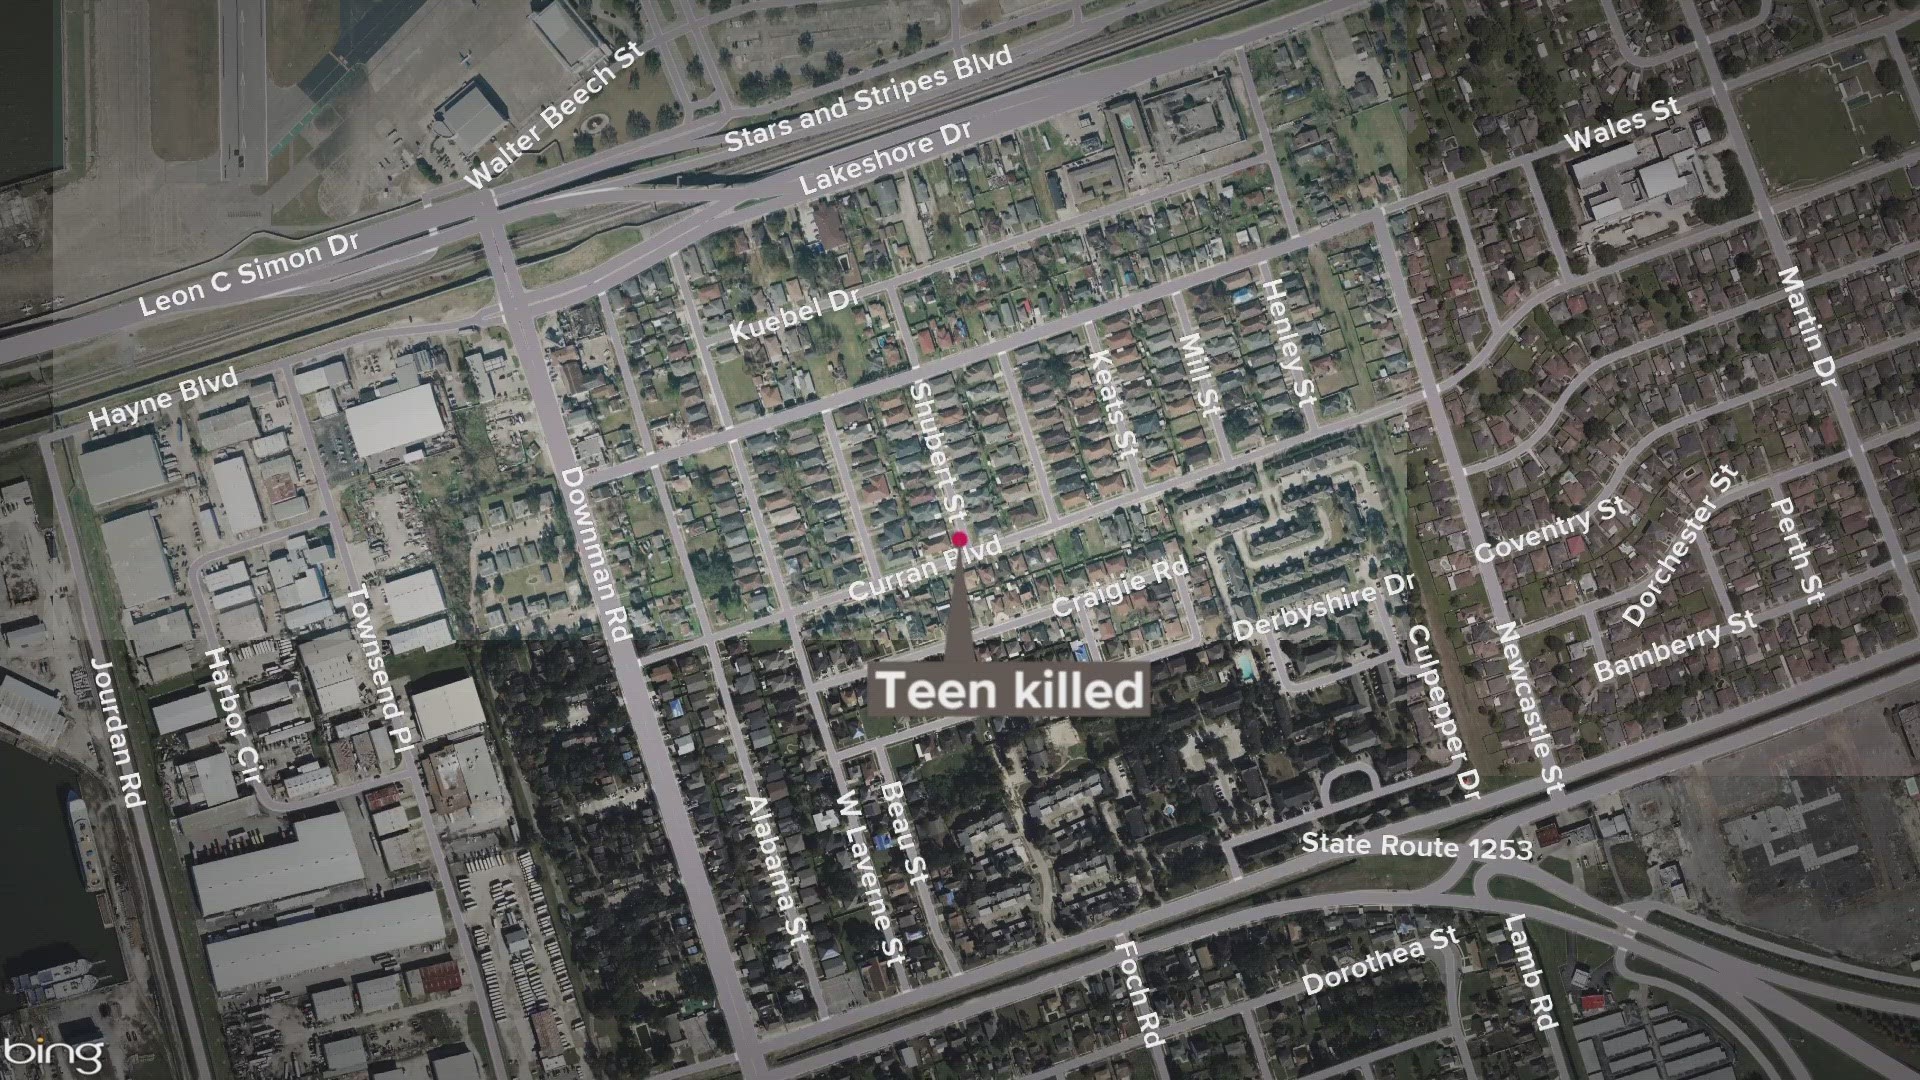 “Deputies were called to the 500 block of Behrman Highway in reference to a shooting. When they arrived, they located an adult male victim on the ground," JPSO says